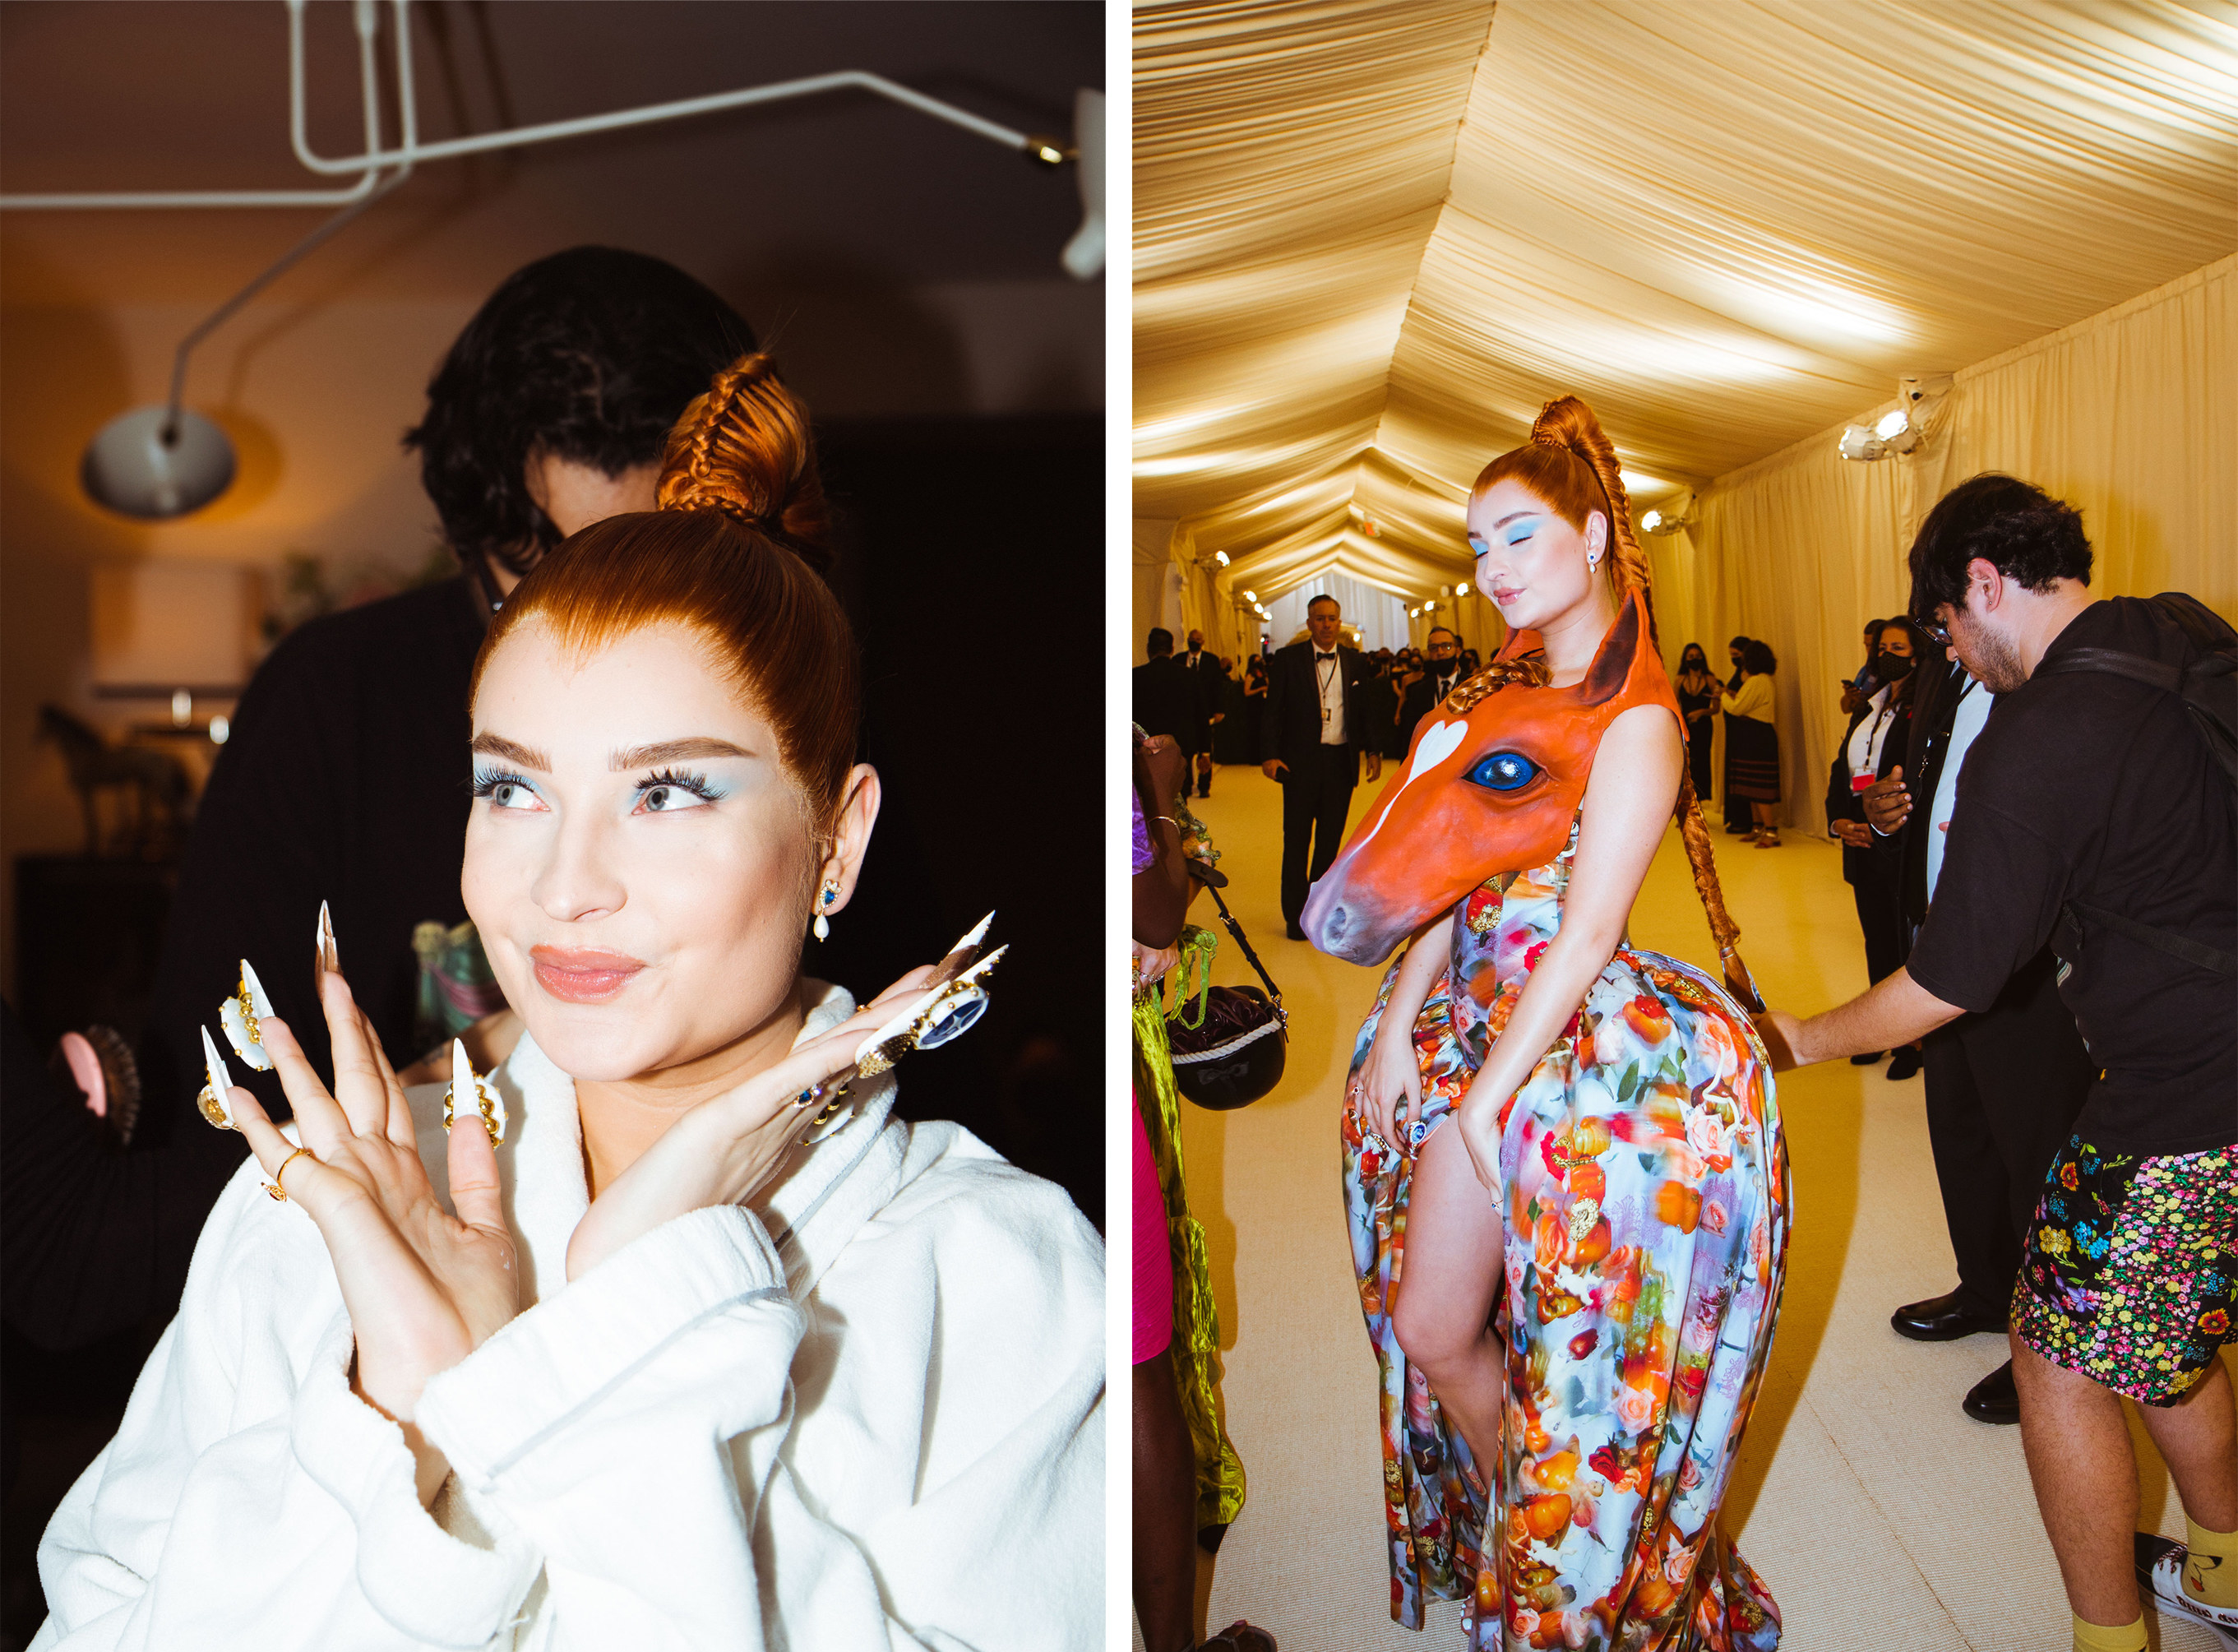 Kim Petras getting her hair done while wearing a bathrobe, and backstage at the Met wearing a horse head over her dress